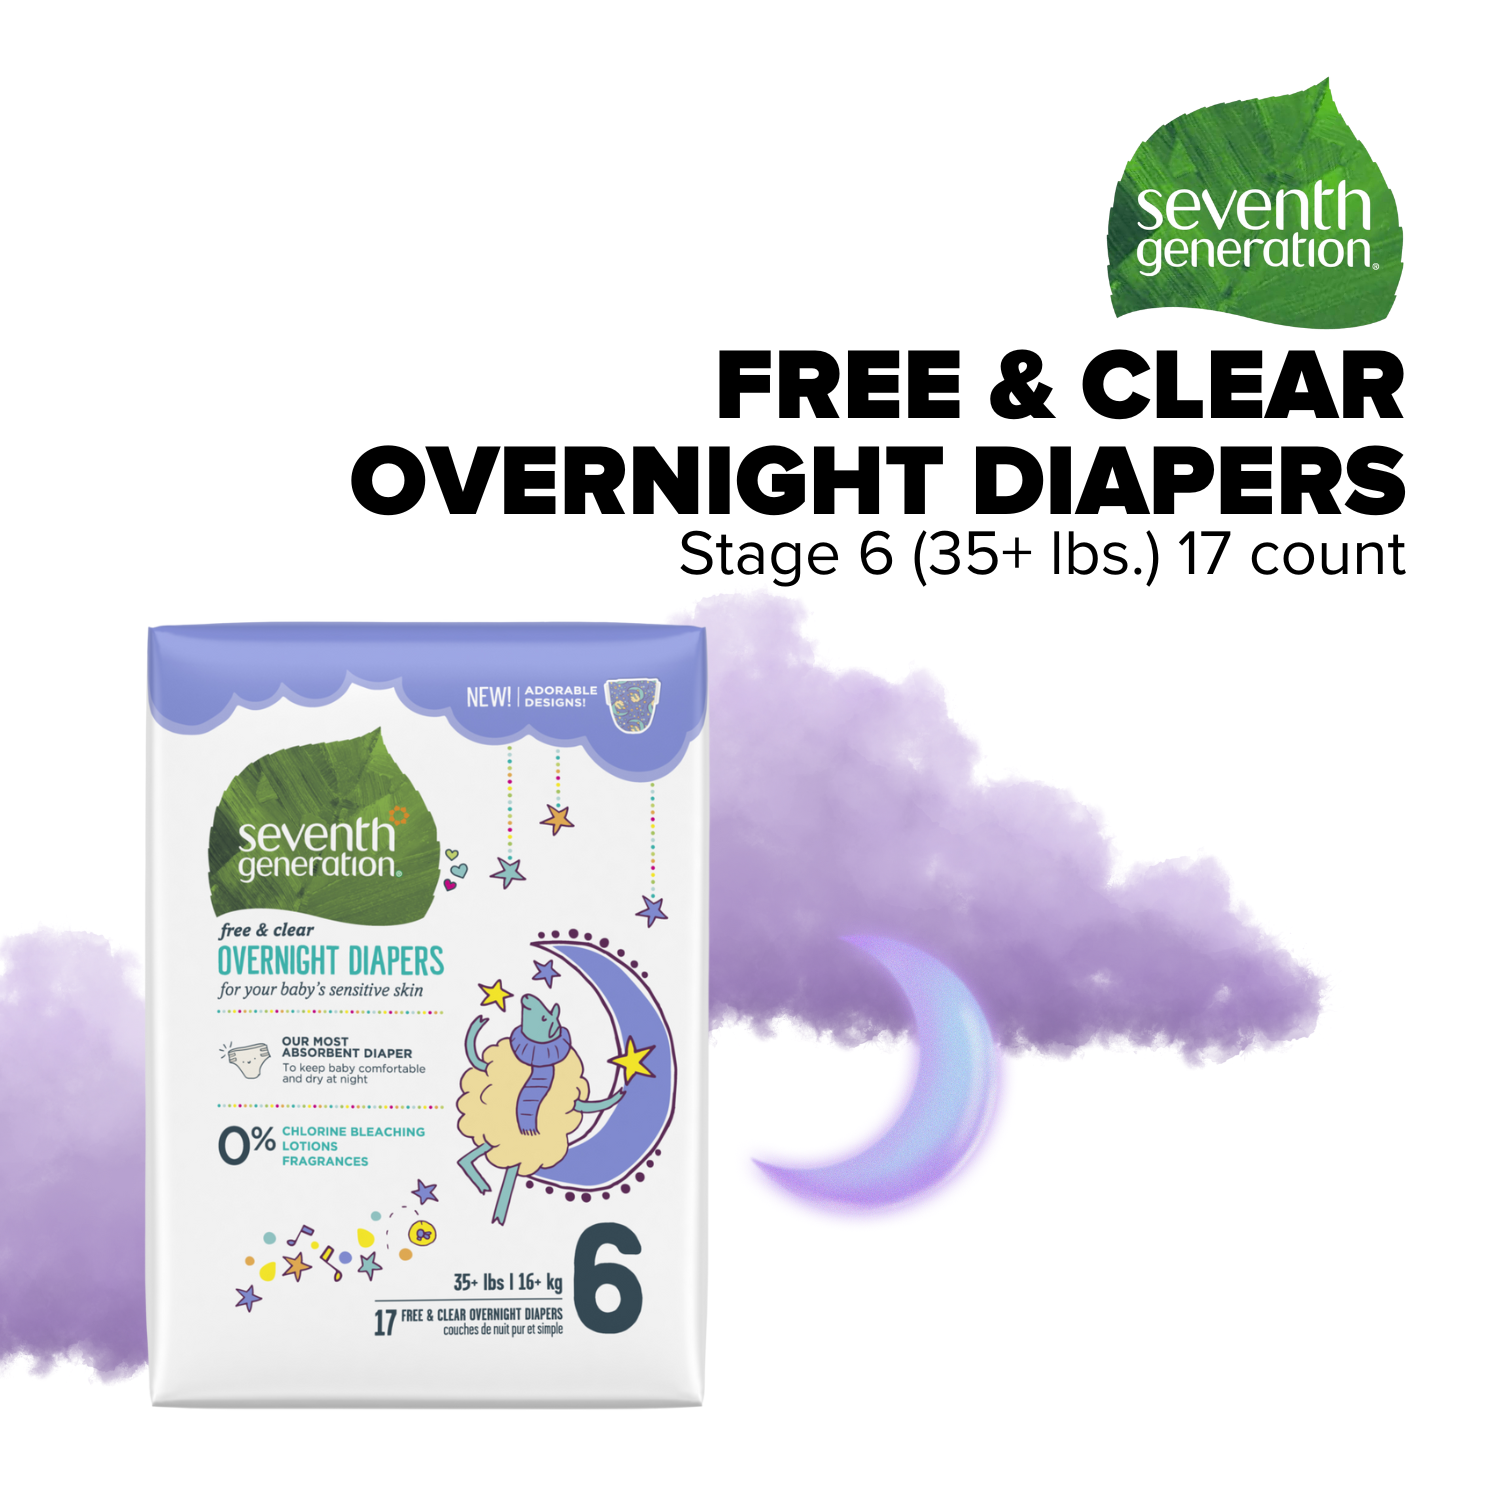 Overnight Diapers - Stage 6 (35+ lbs.)